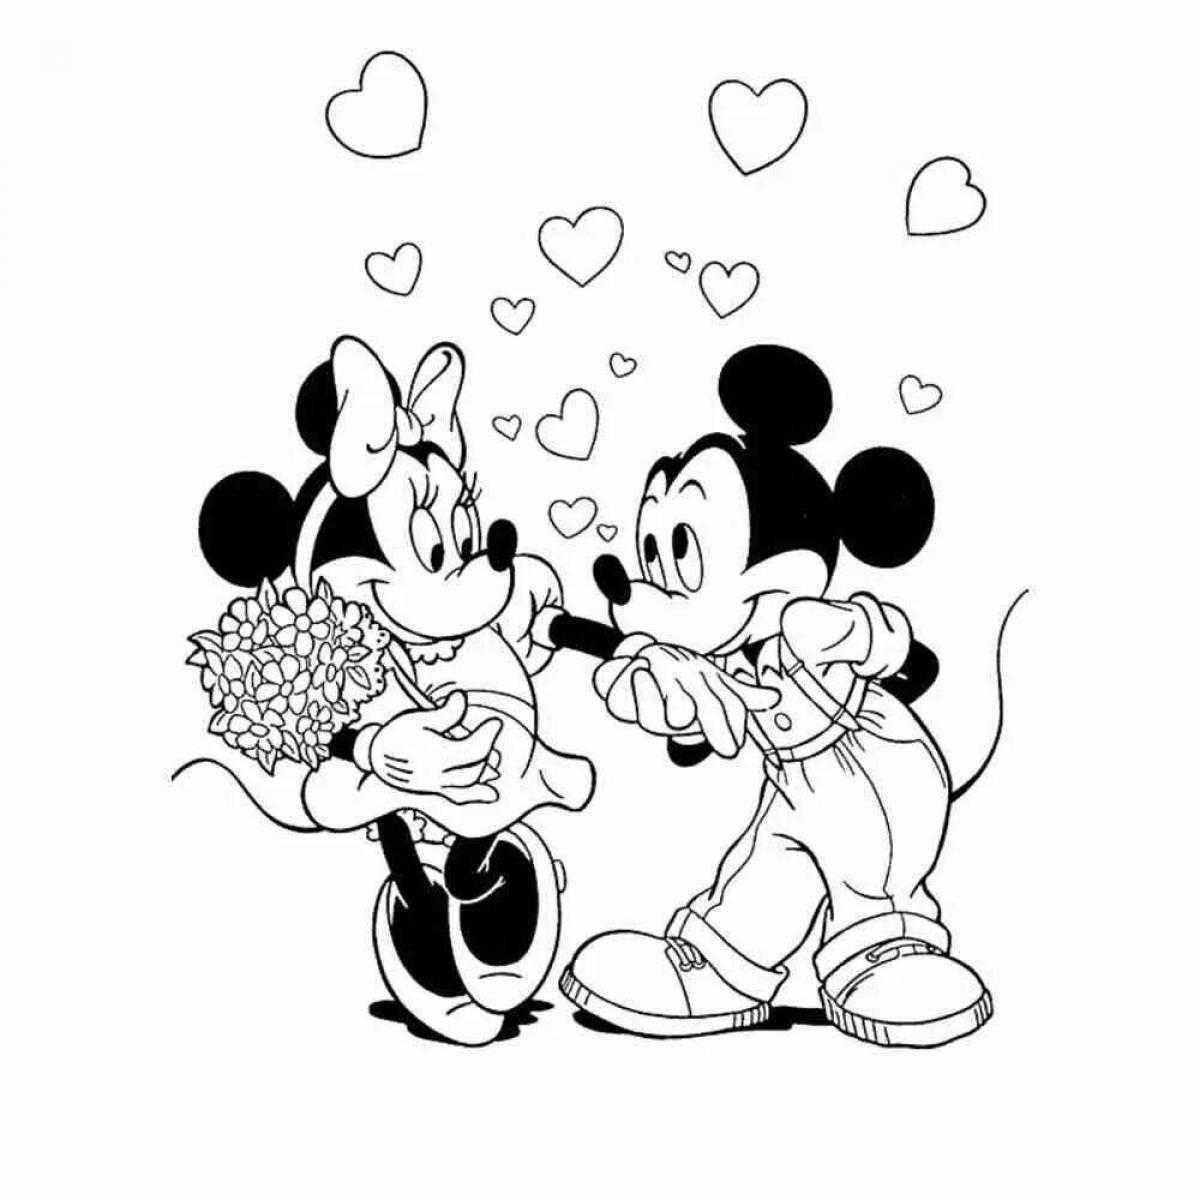 Fun coloring with mickey mouse